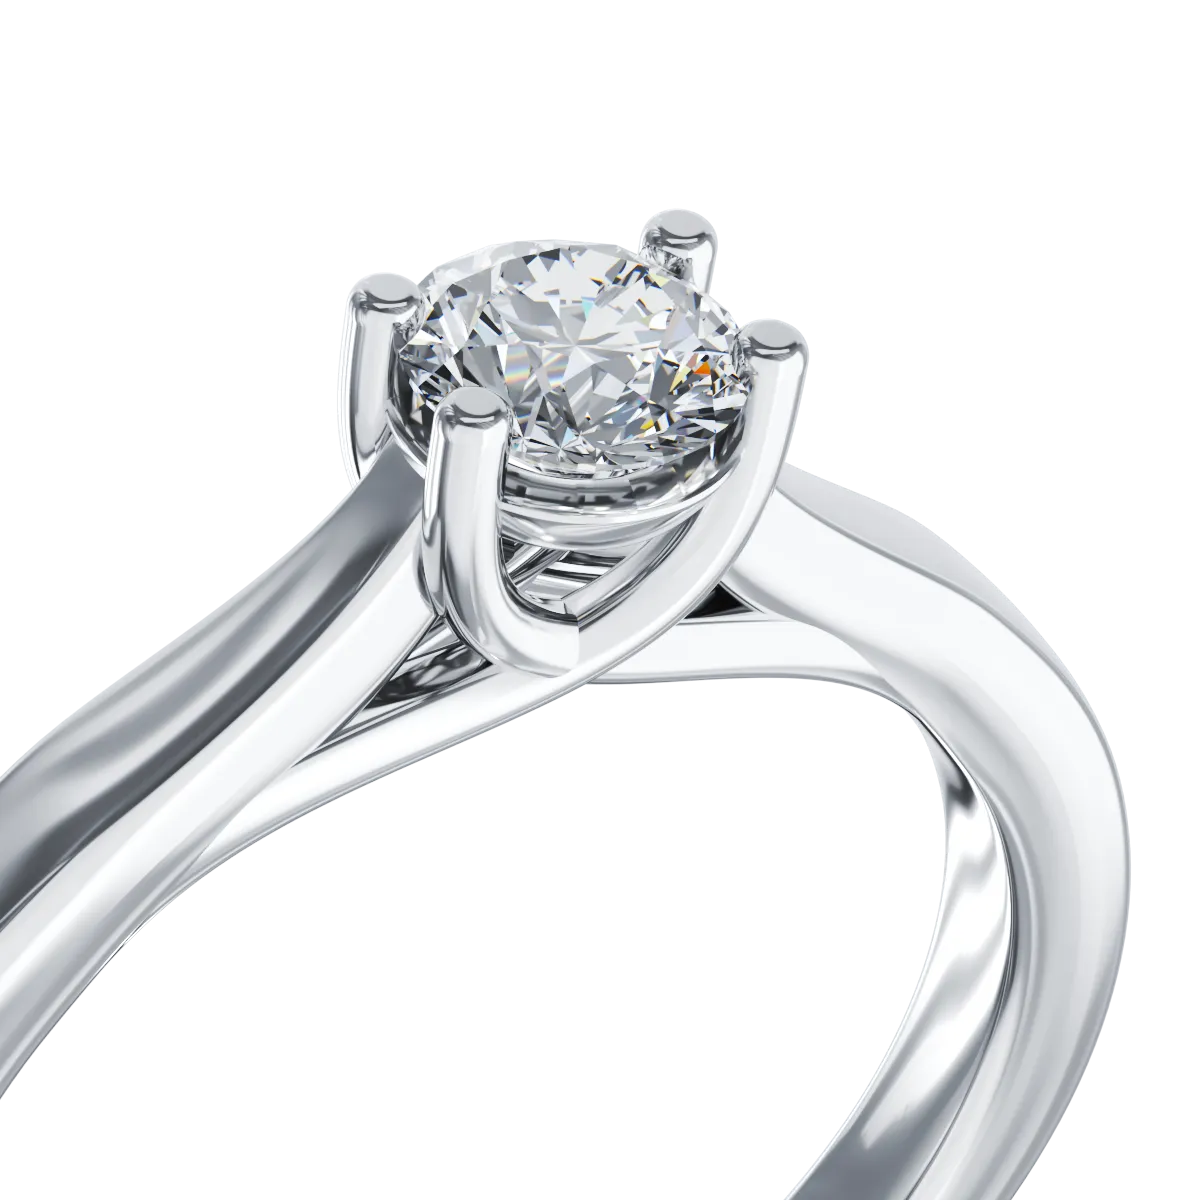 18K white gold engagement ring with a 0.25ct solitaire diamond